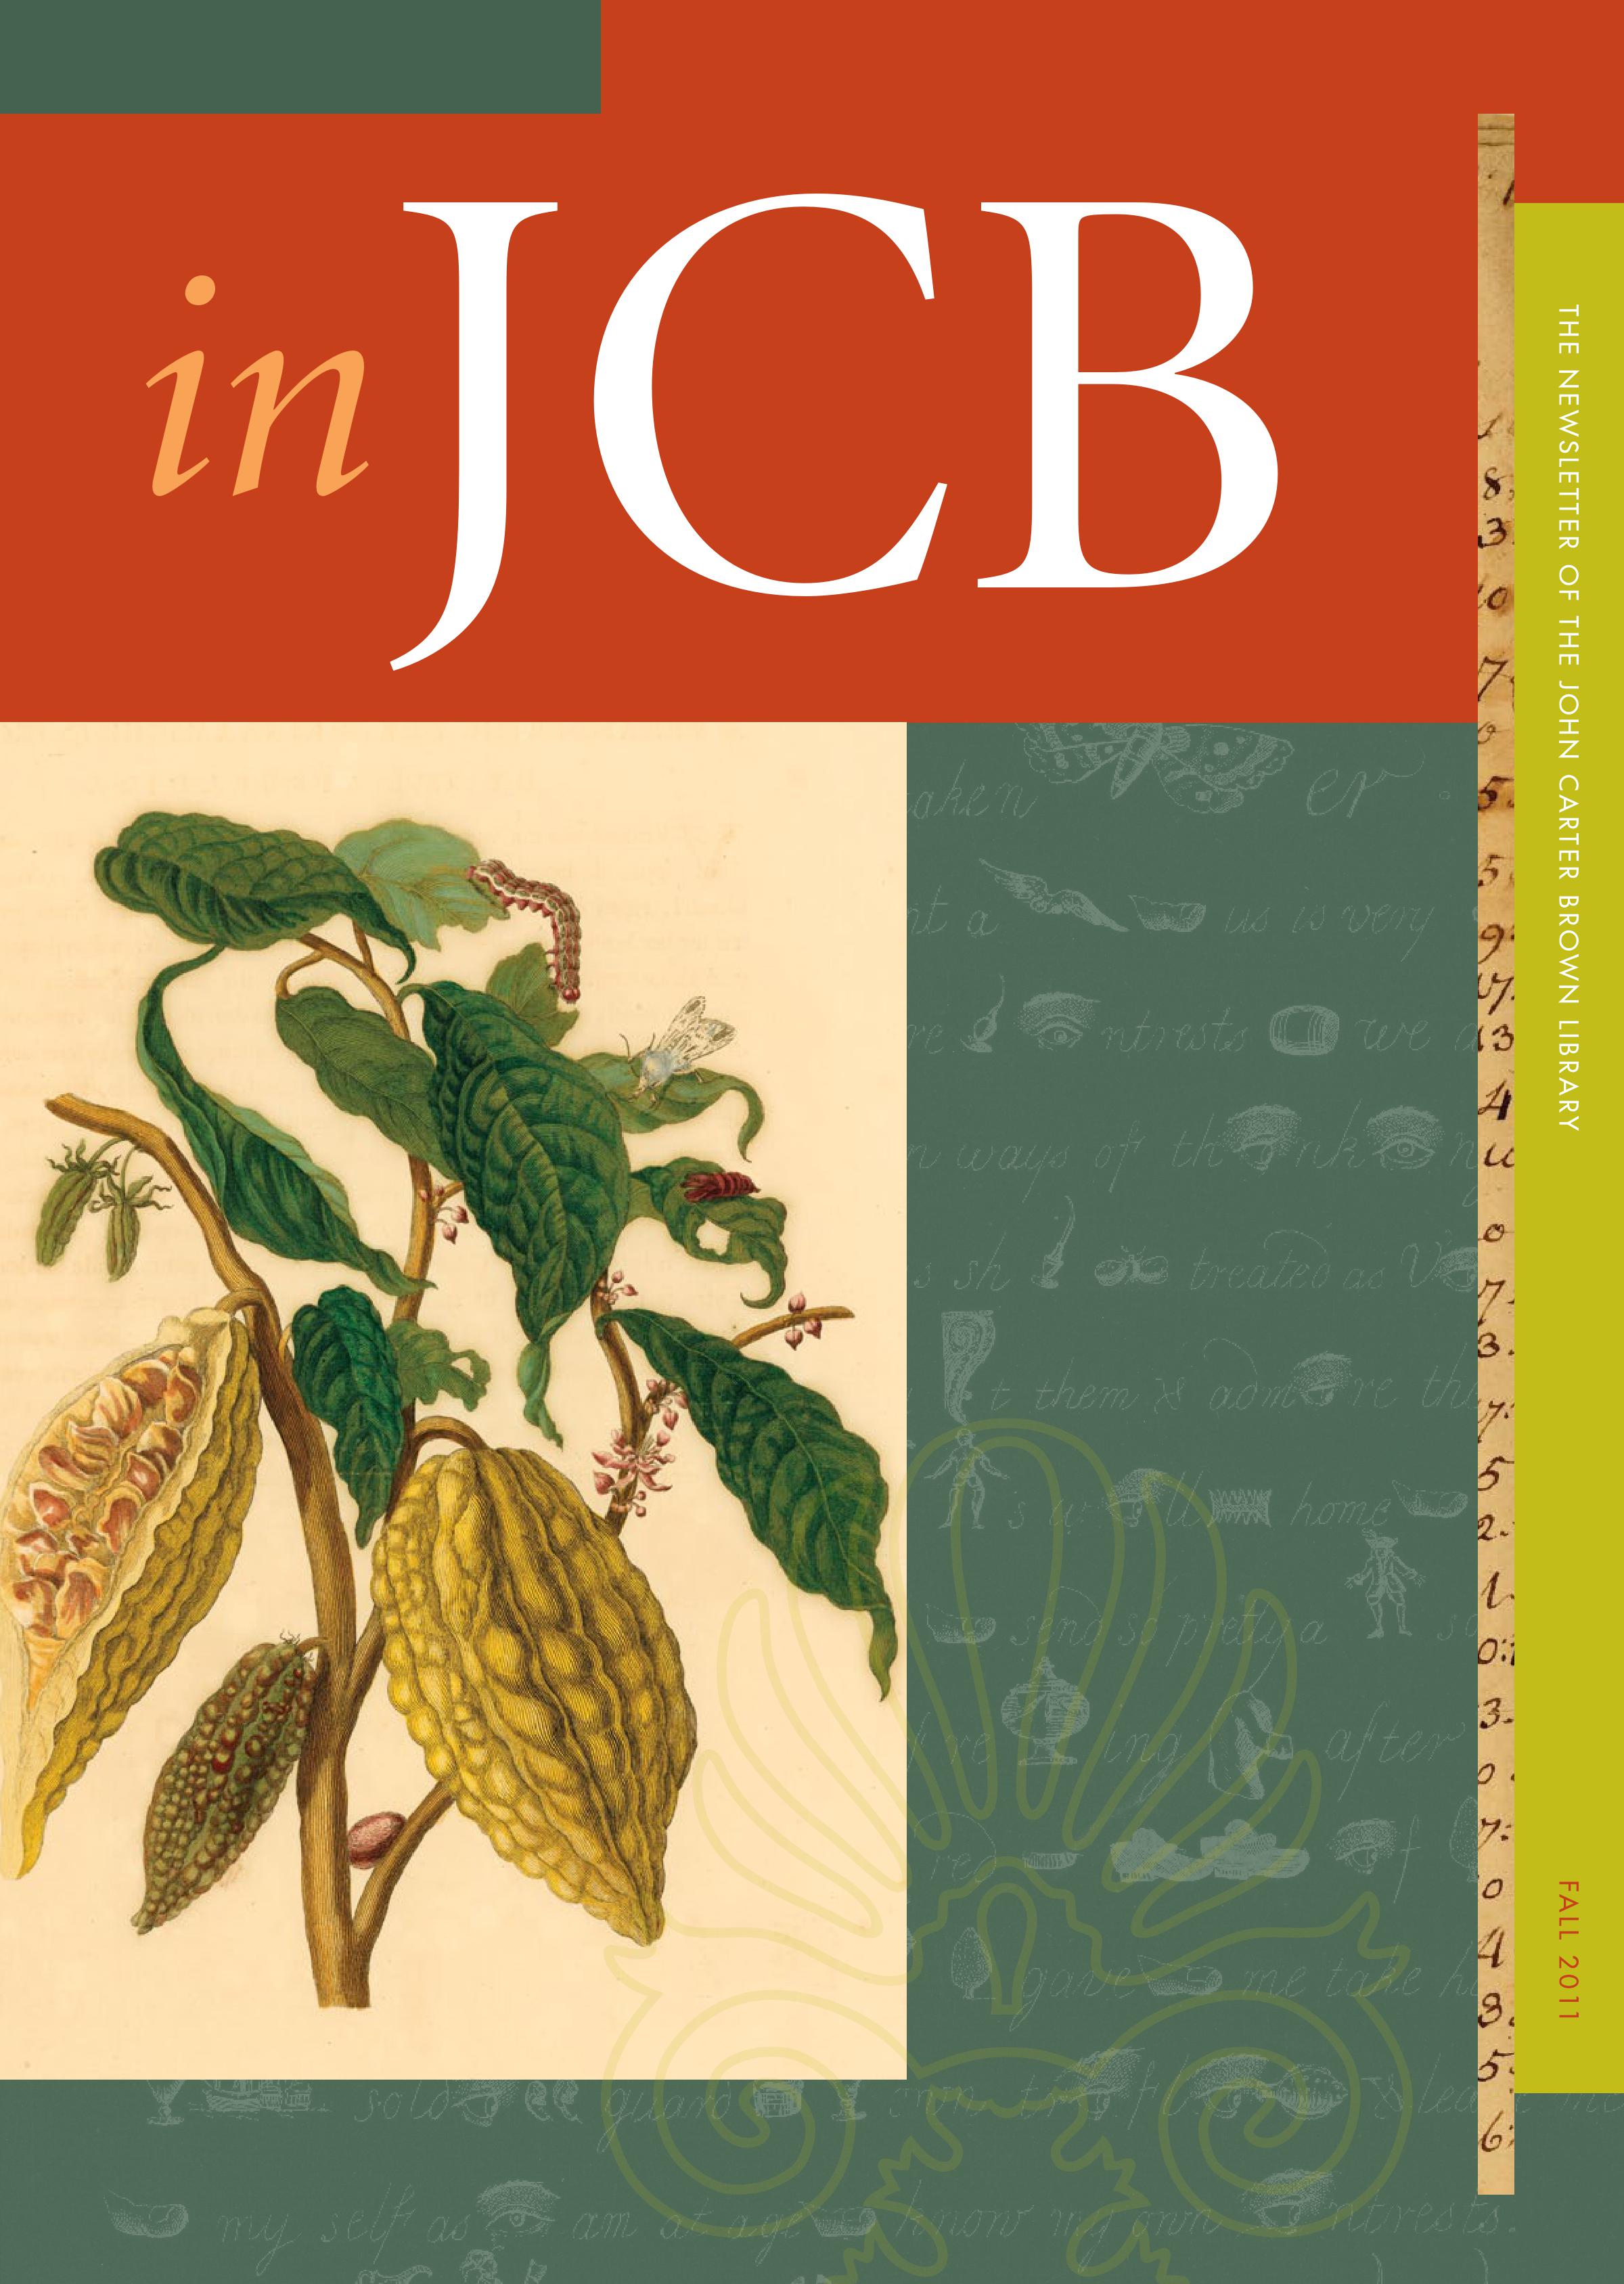 cover of the In JCB newsletter showing a colorful image of cacao